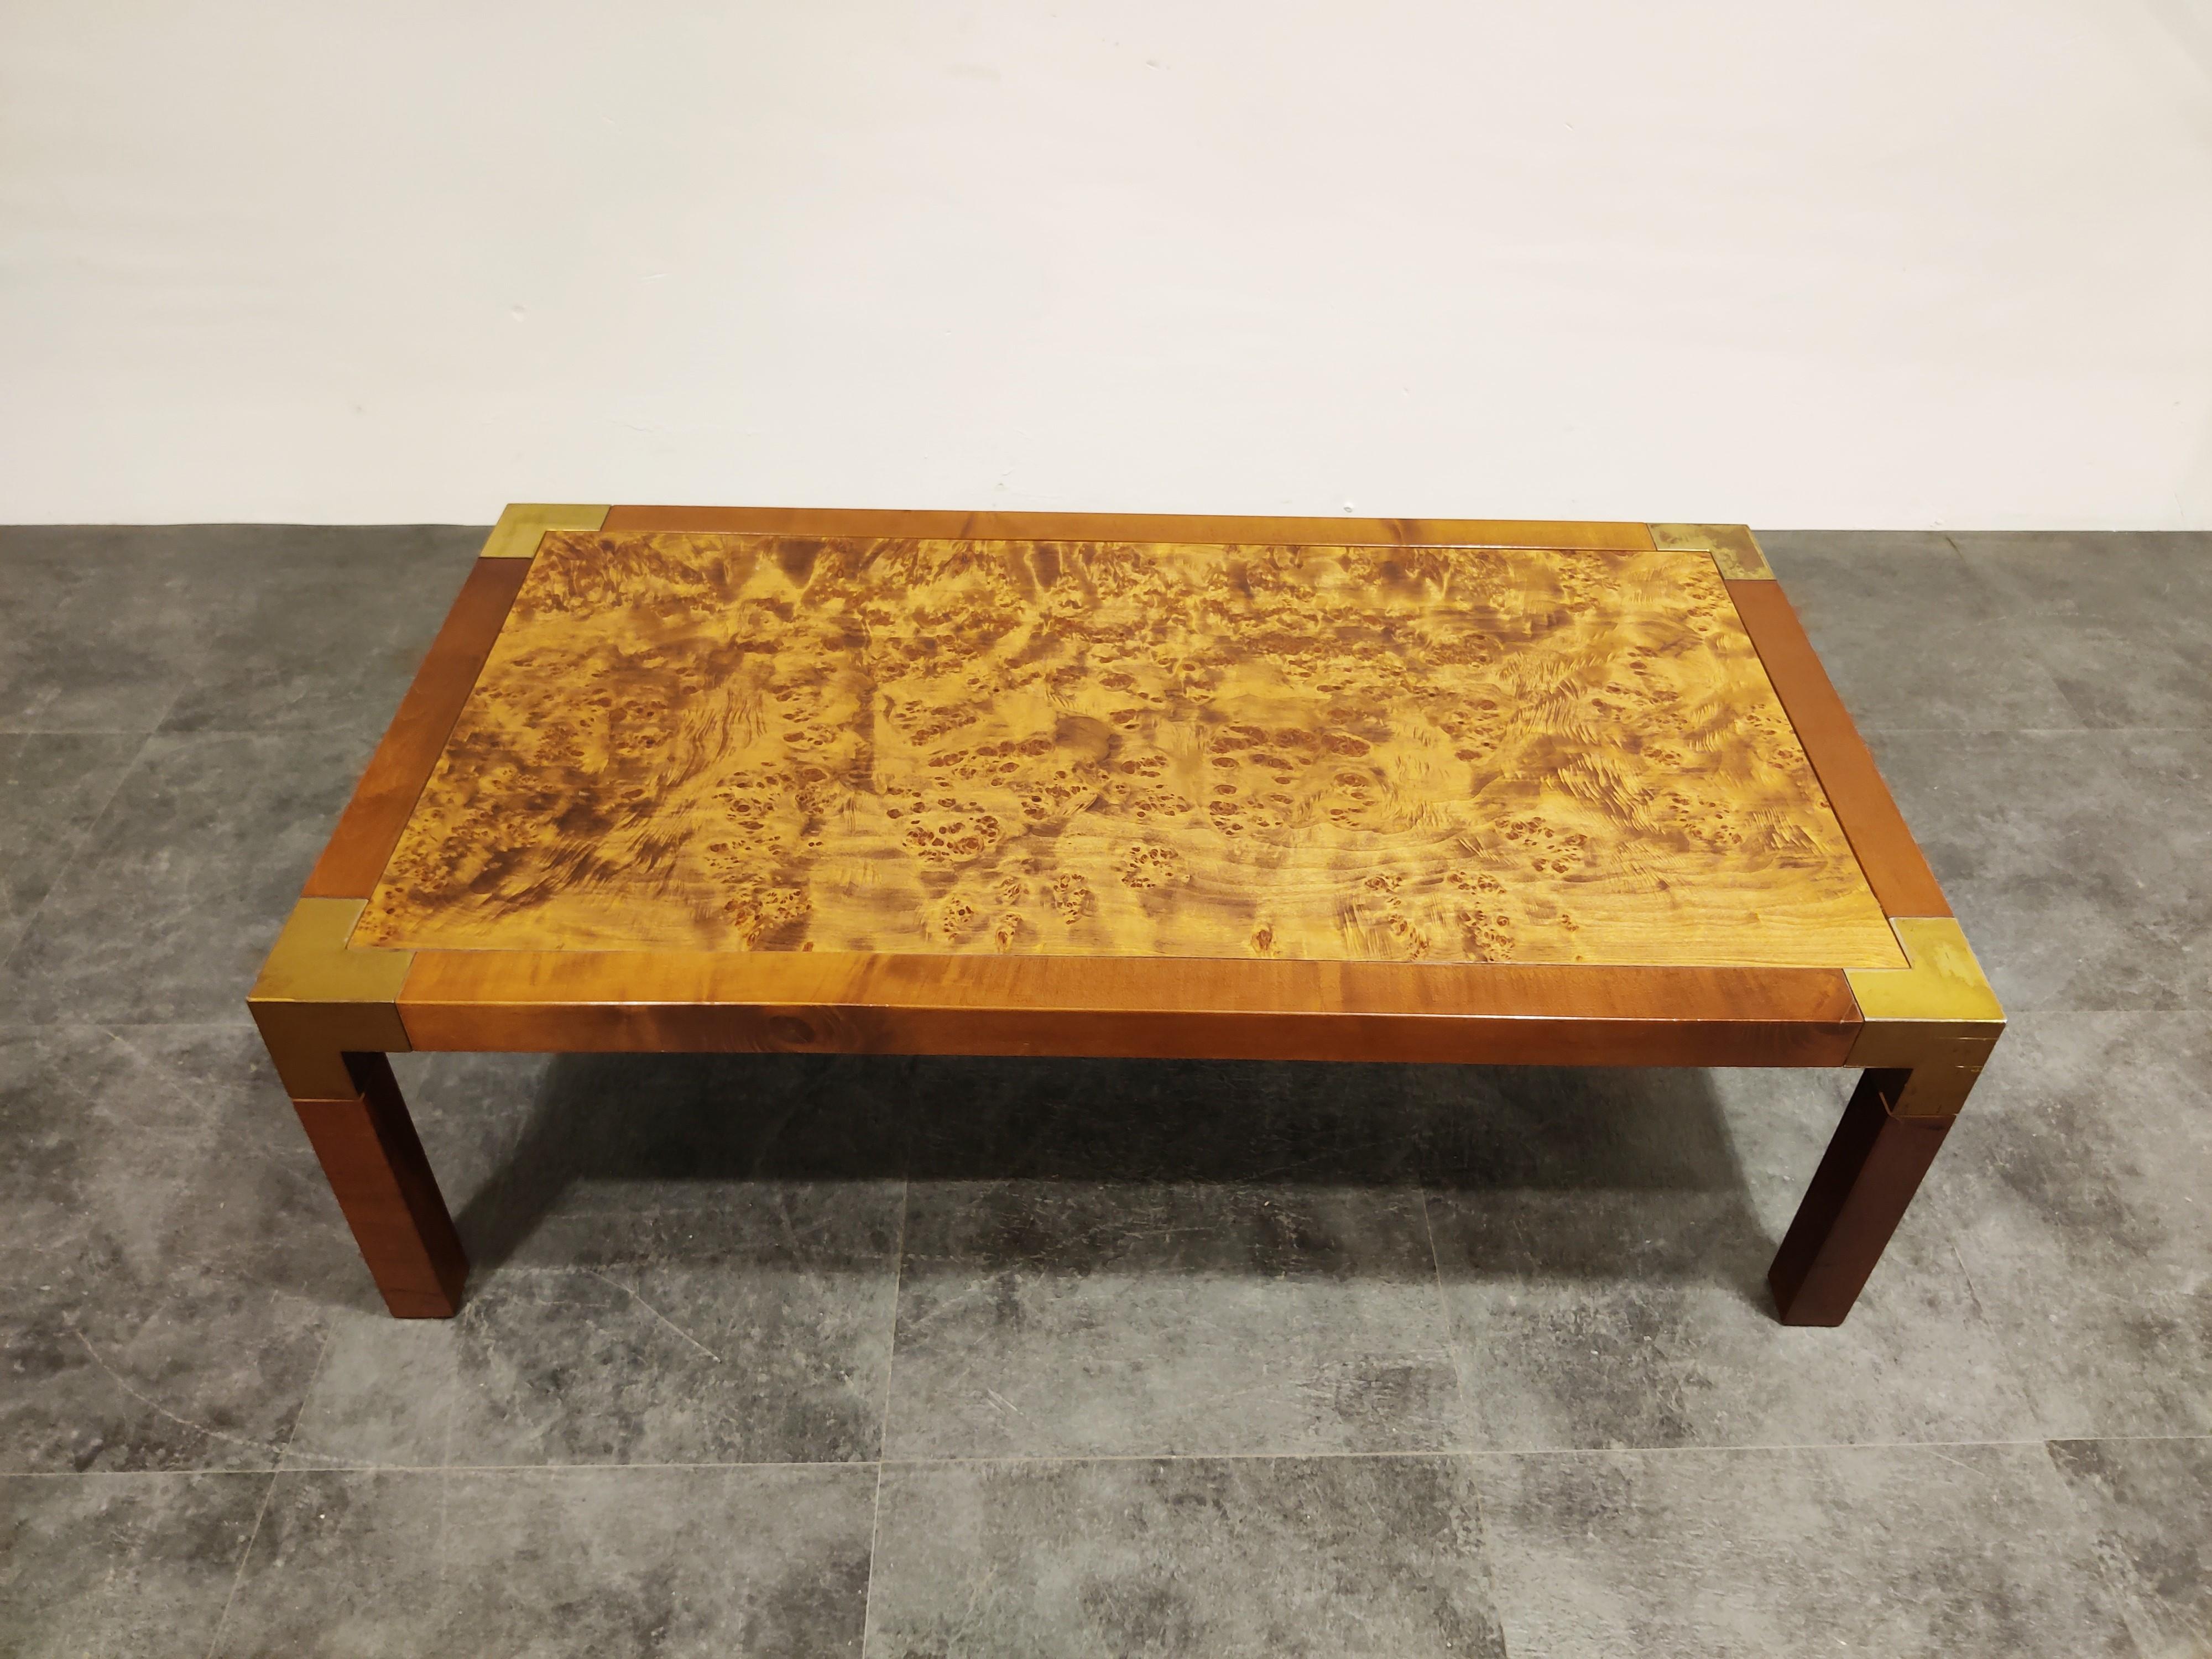 Elegant rectangular burl wooden coffee table with brass. 

Timeless seventies glamour coffee table.

Good quality, made in France and very much in the style of Jean Claude Maehey furniture.

Condition: Normal wear with some scratches in the